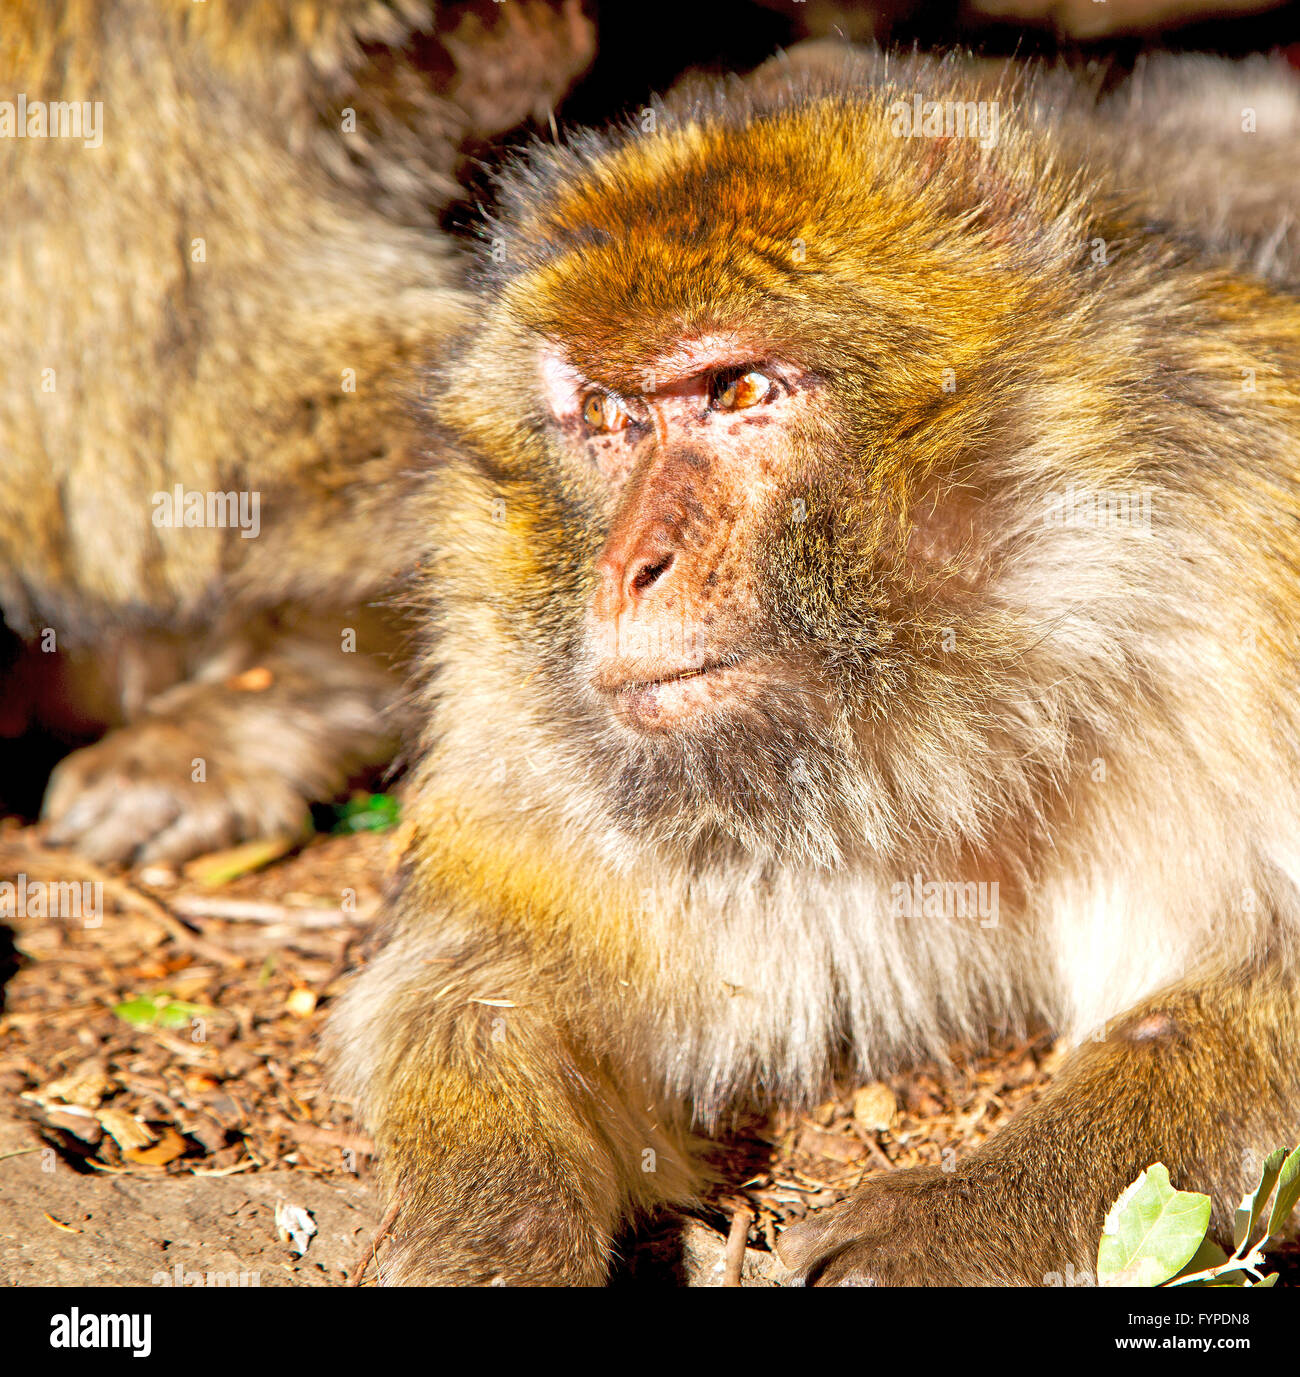 bush monkey in africa morocco and natural background fauna close up Stock Photo